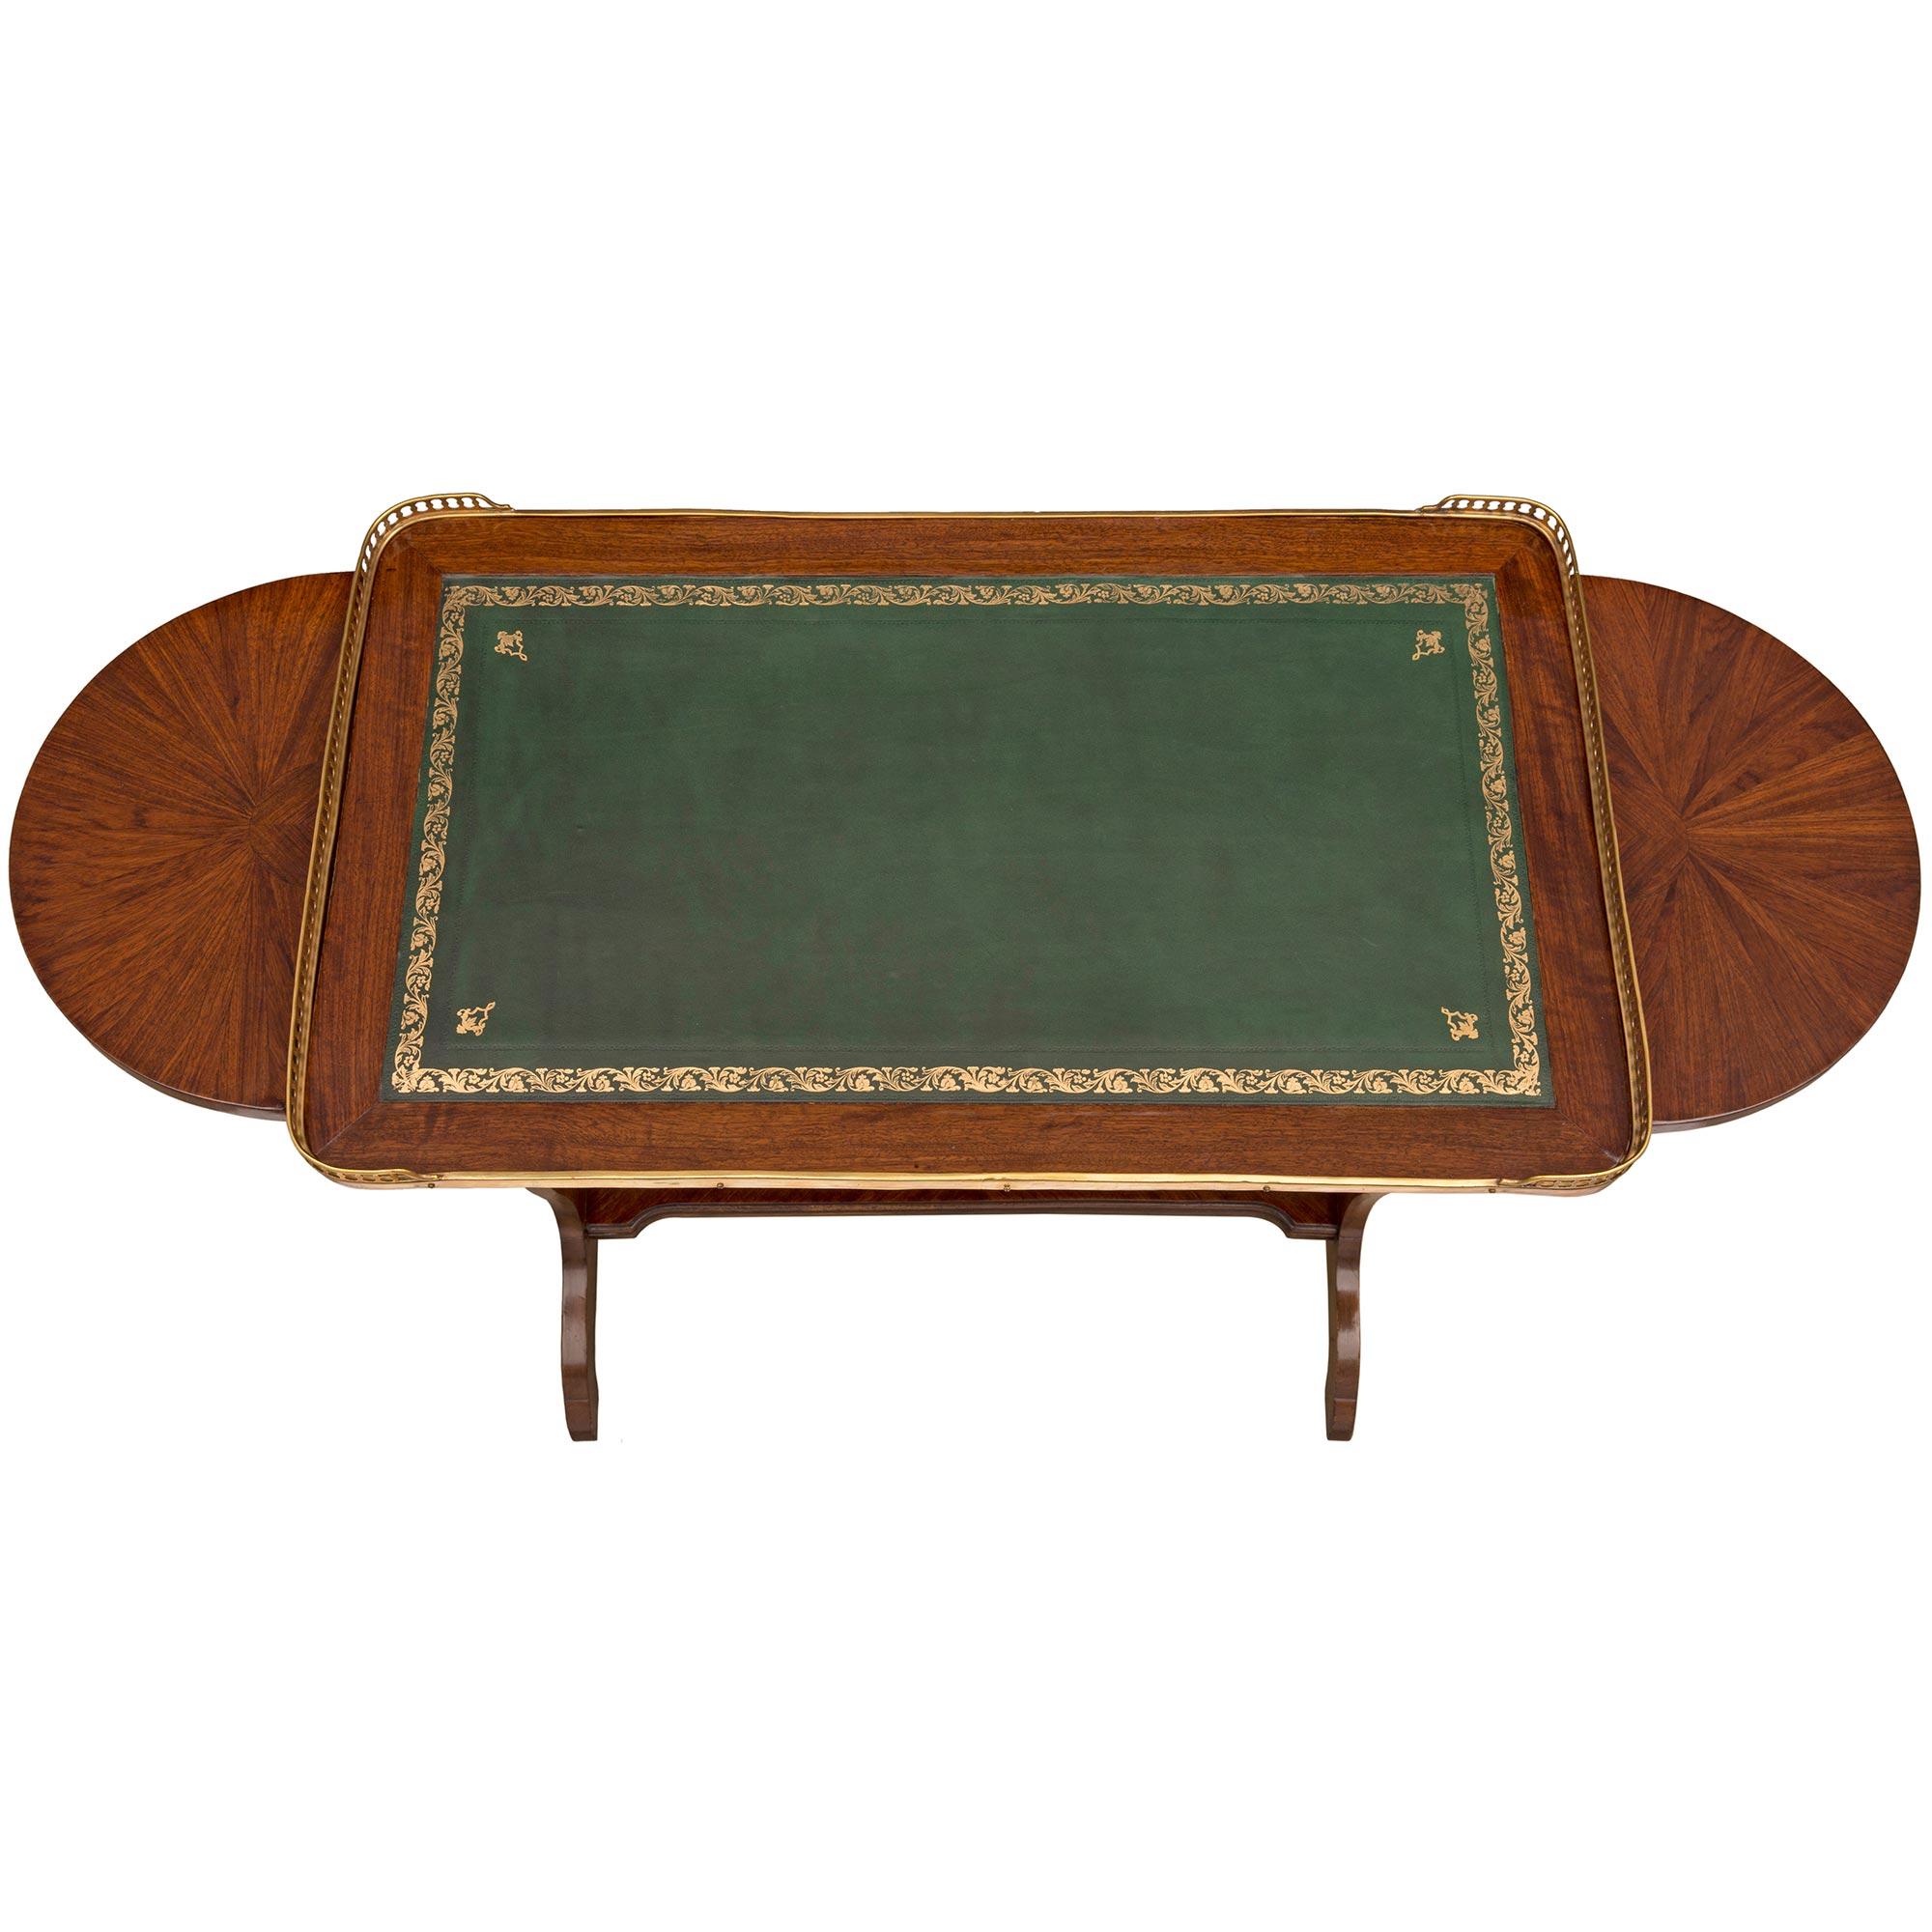 An elegant French 19th century Louis XVI st. tulipwood and ormolu side table. The table is raised by Fine arched feet below the beautifully shaped pierced supports each connected by a straight mottled stretcher. Above is the gold tooled green